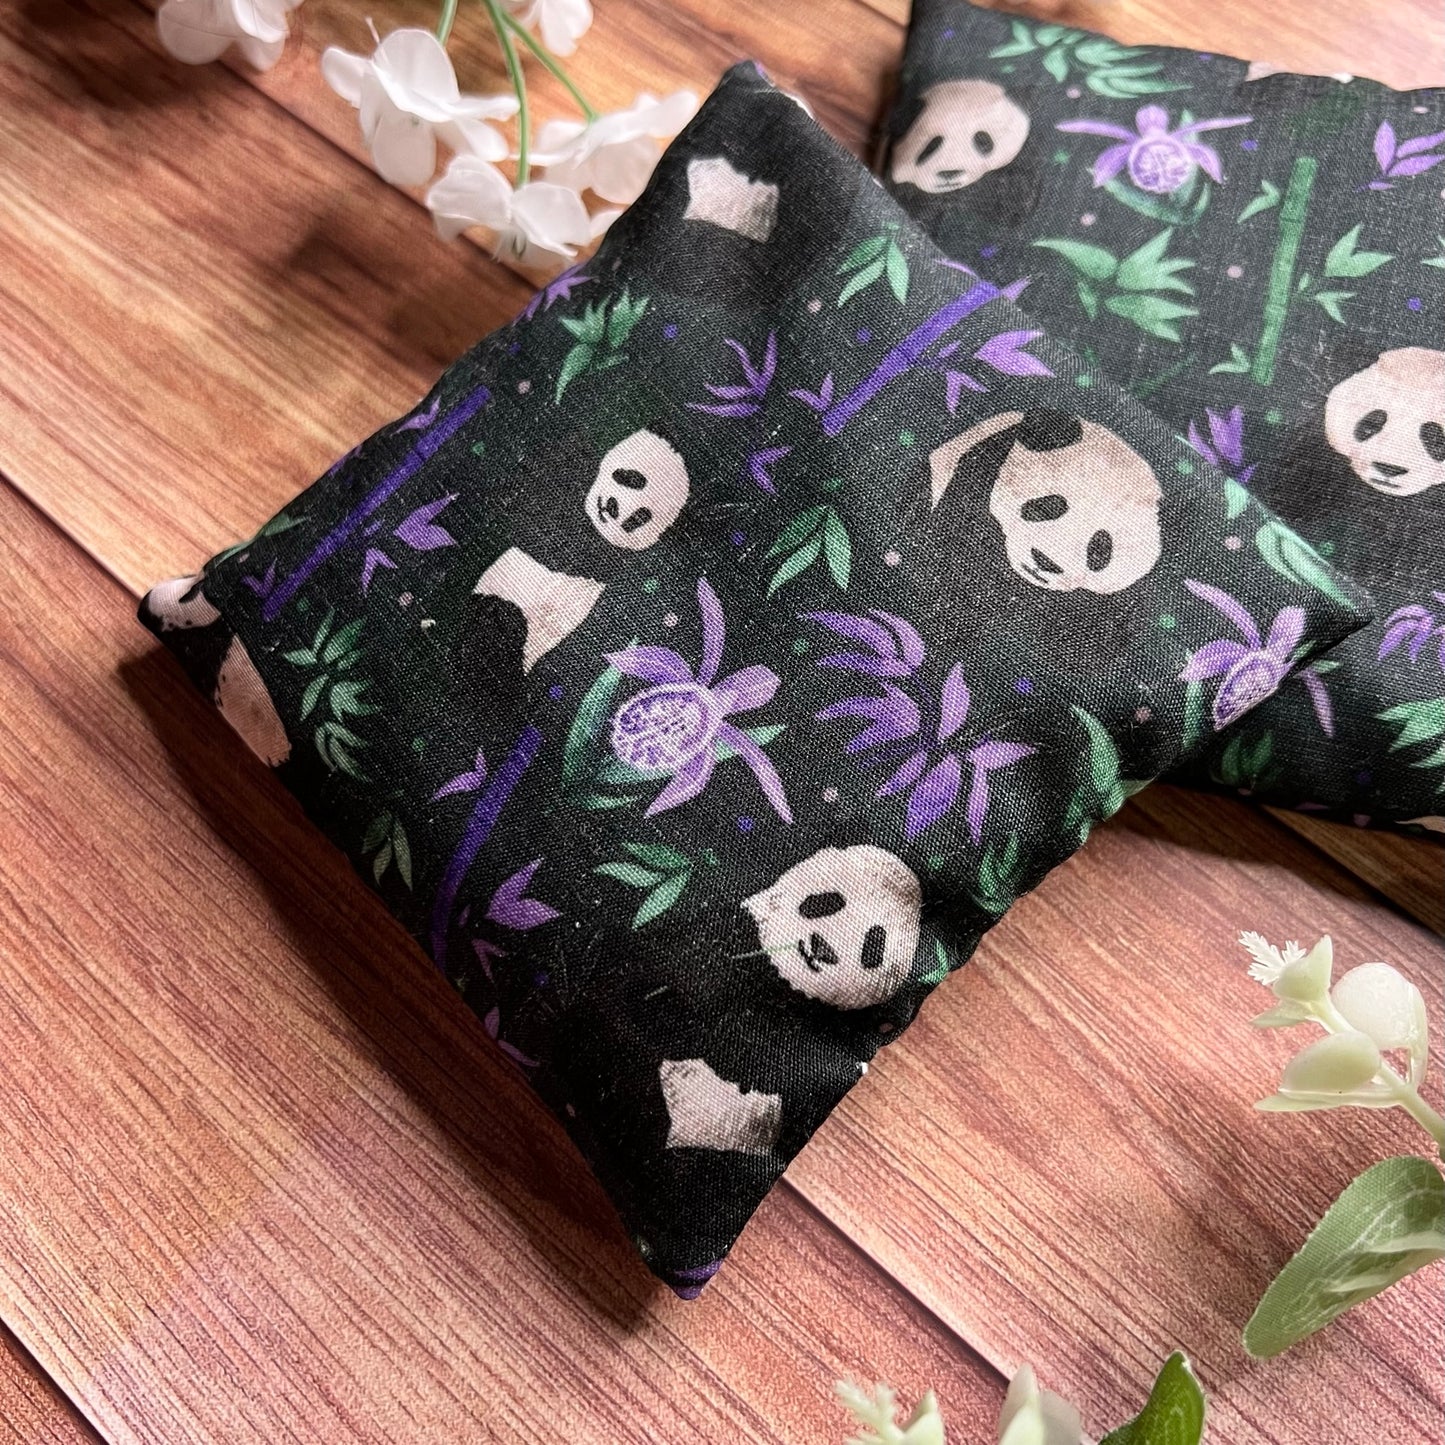 DIY Giant Panda Handwarmers - Make Your Own Lavender-Scented Heated Bags